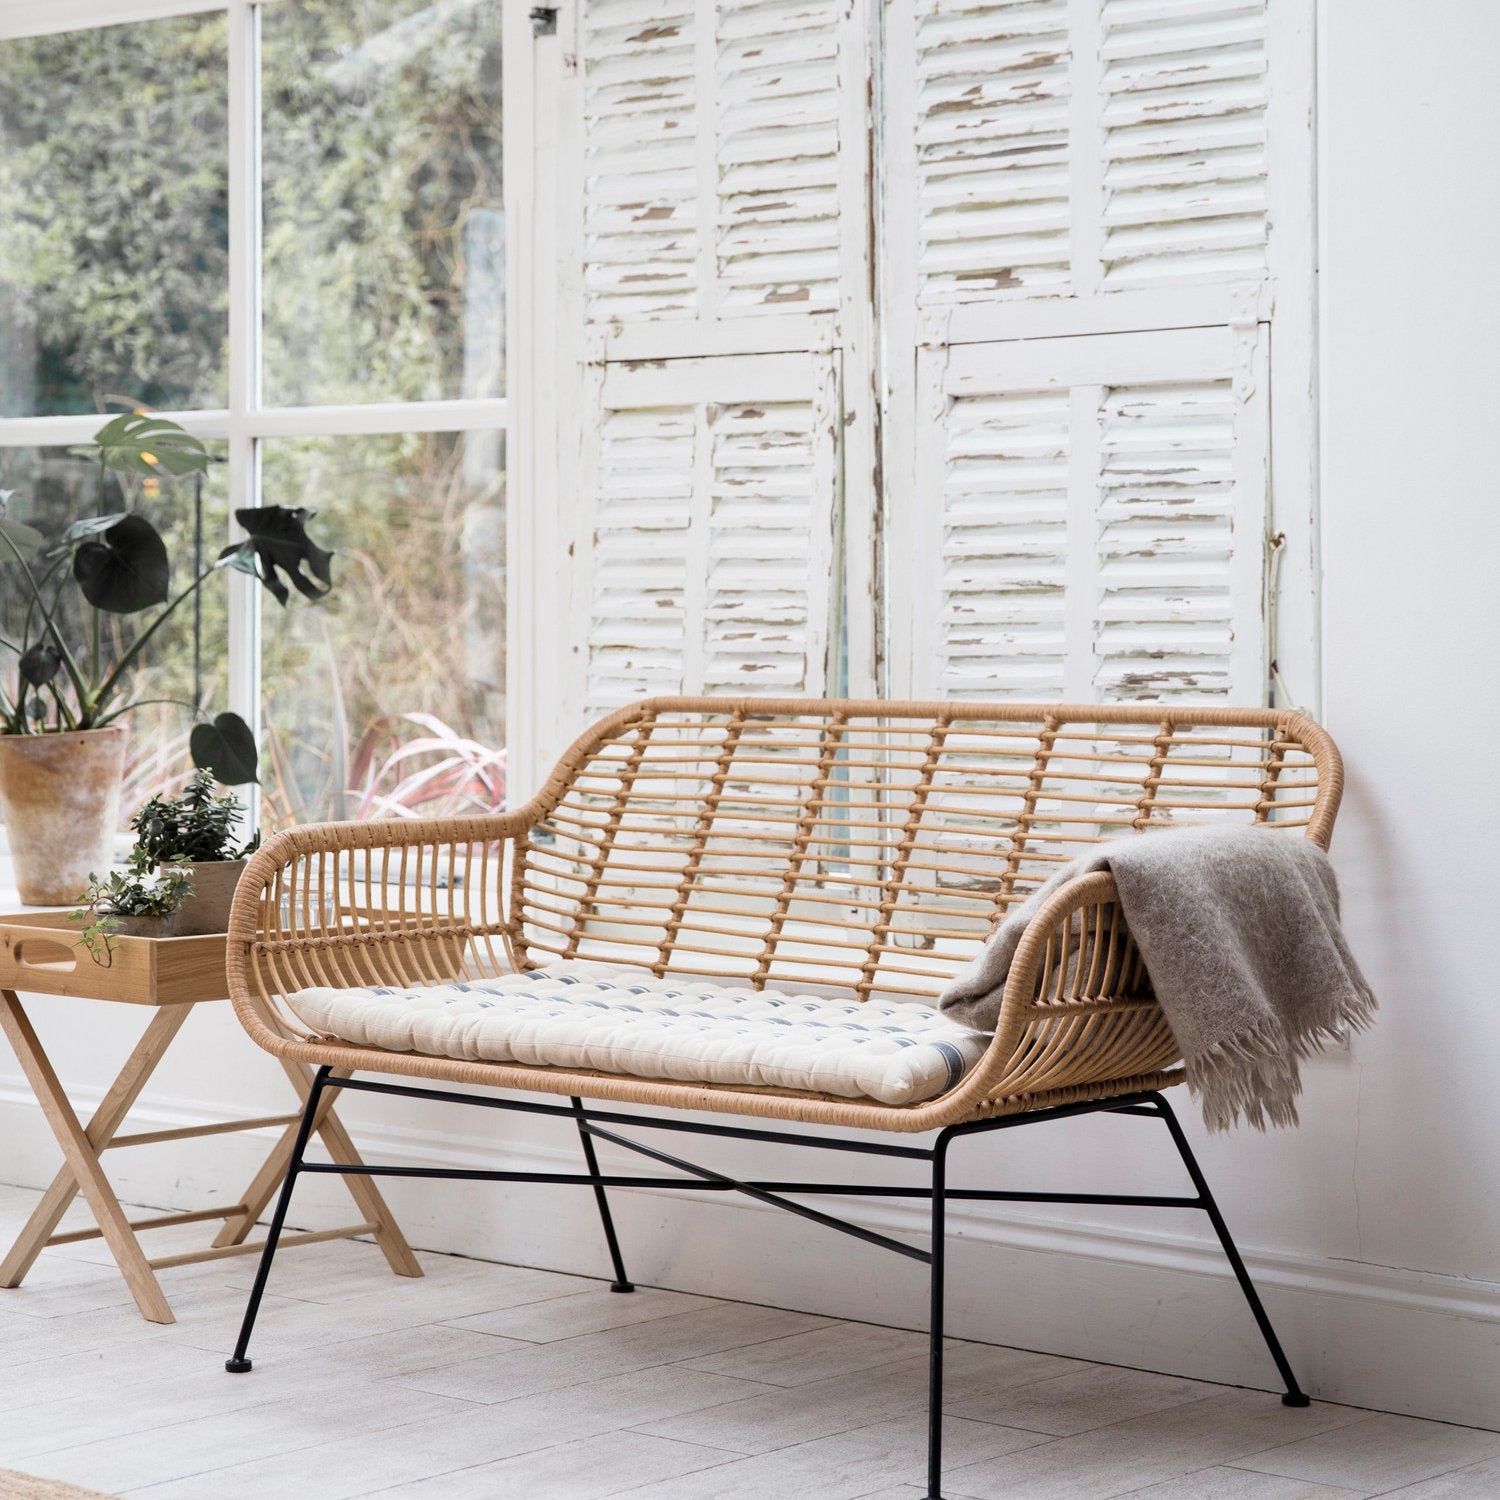 Hampstead Bench by Garden Trading - PE Bamboo